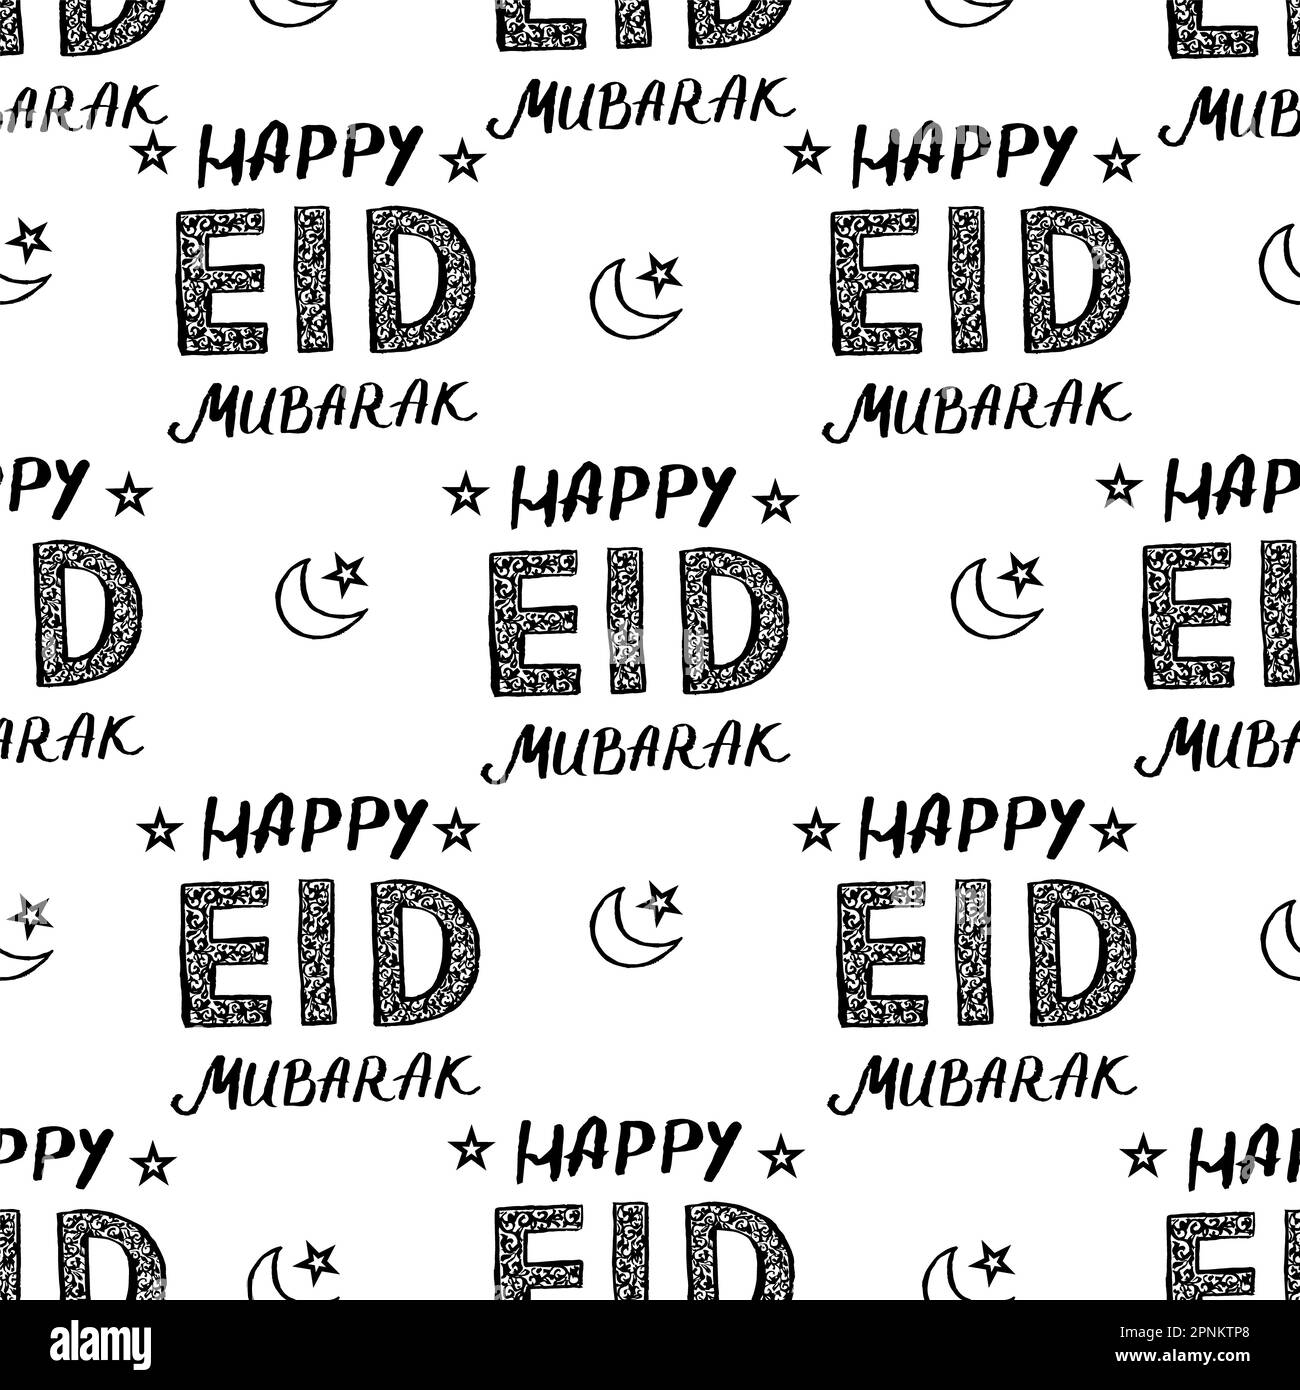 Happy Eid Mubarak. Pattern with Eid Mubarak, beautiful lettering. Repeating pattern for the holiday. Stock Photo